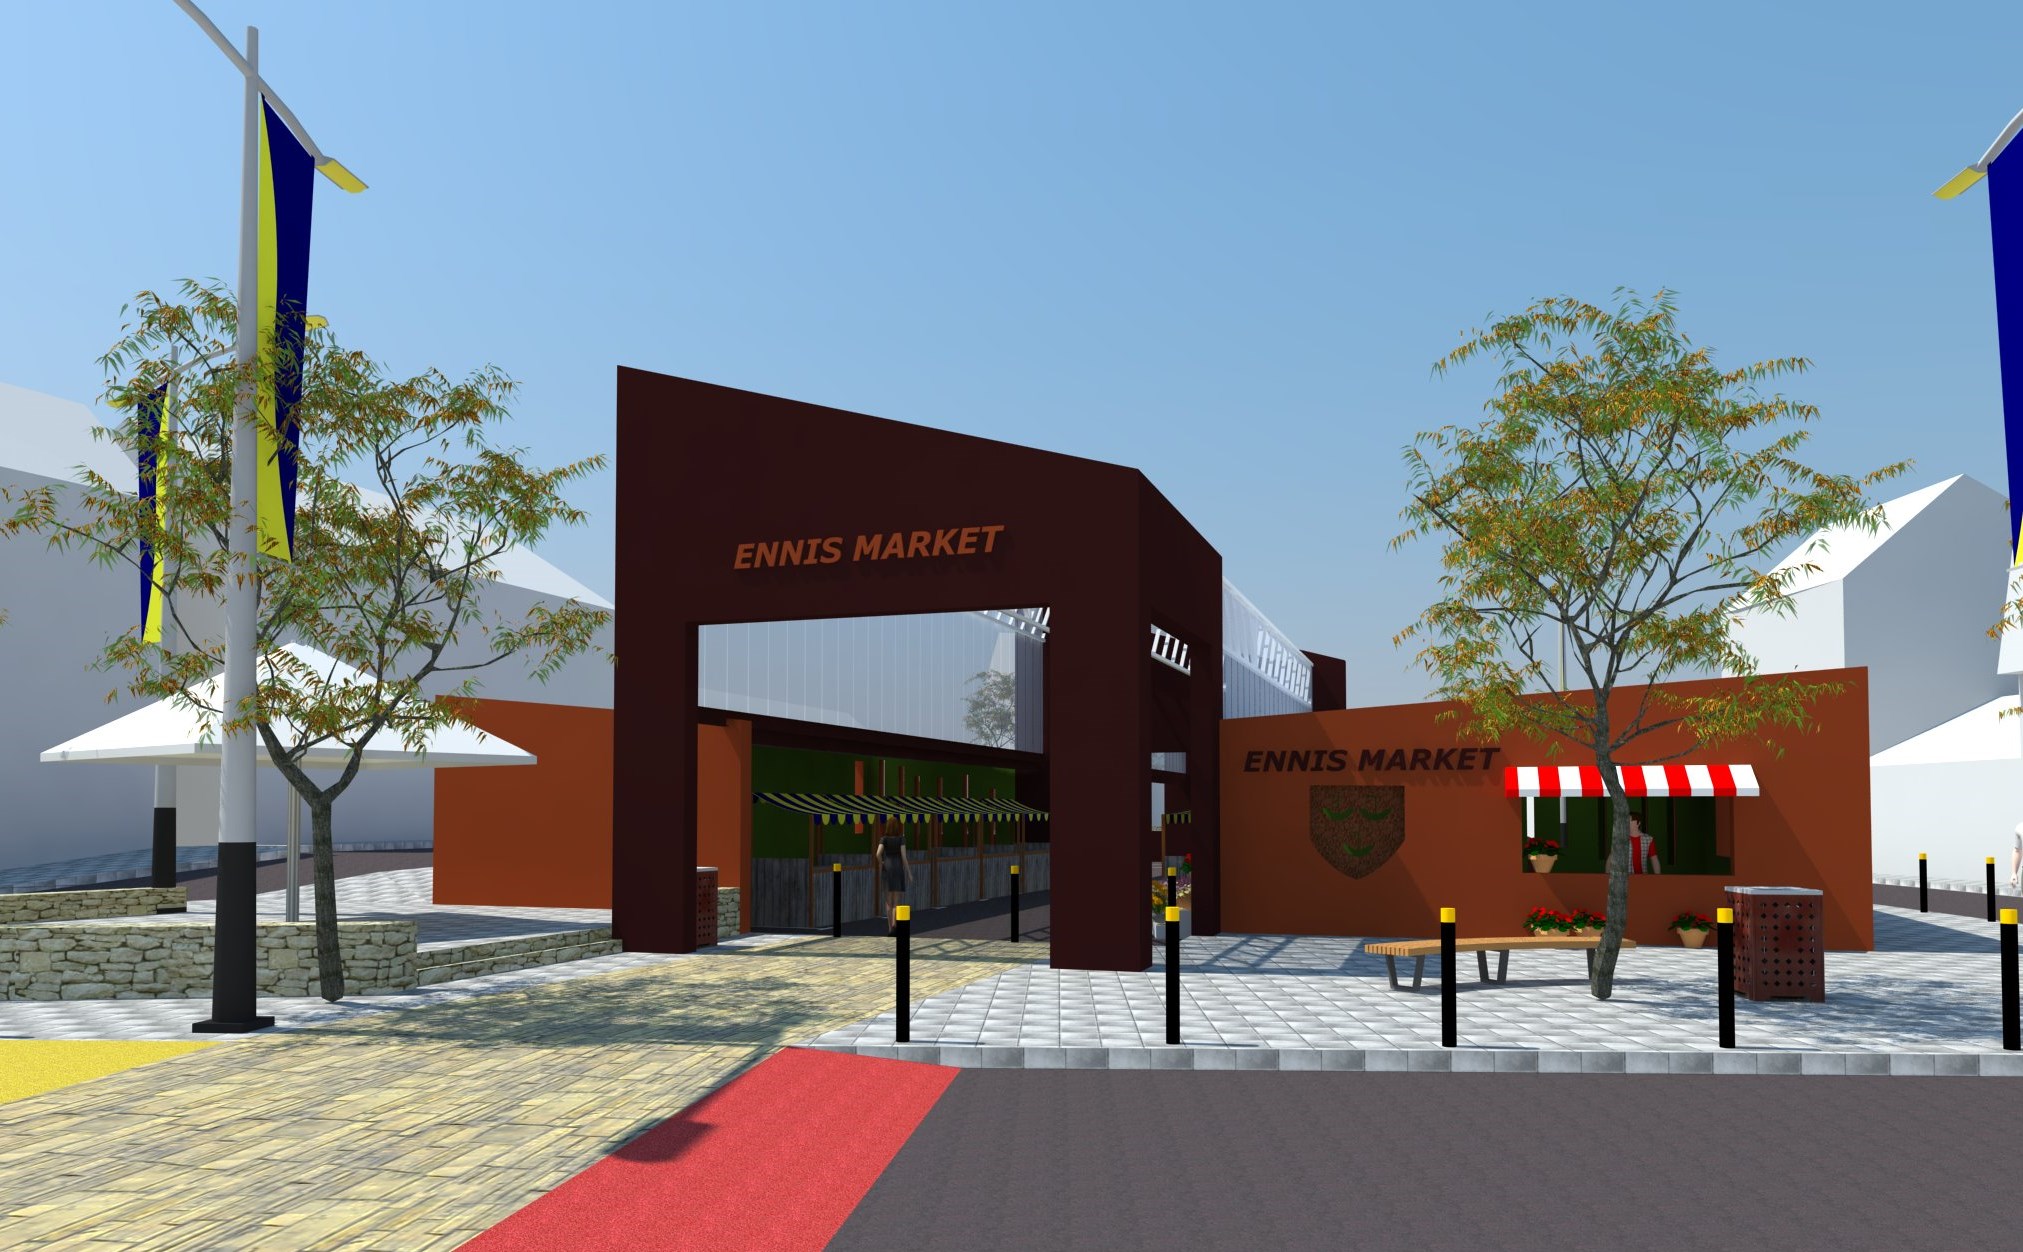 The proposed design of the new market at Ennis